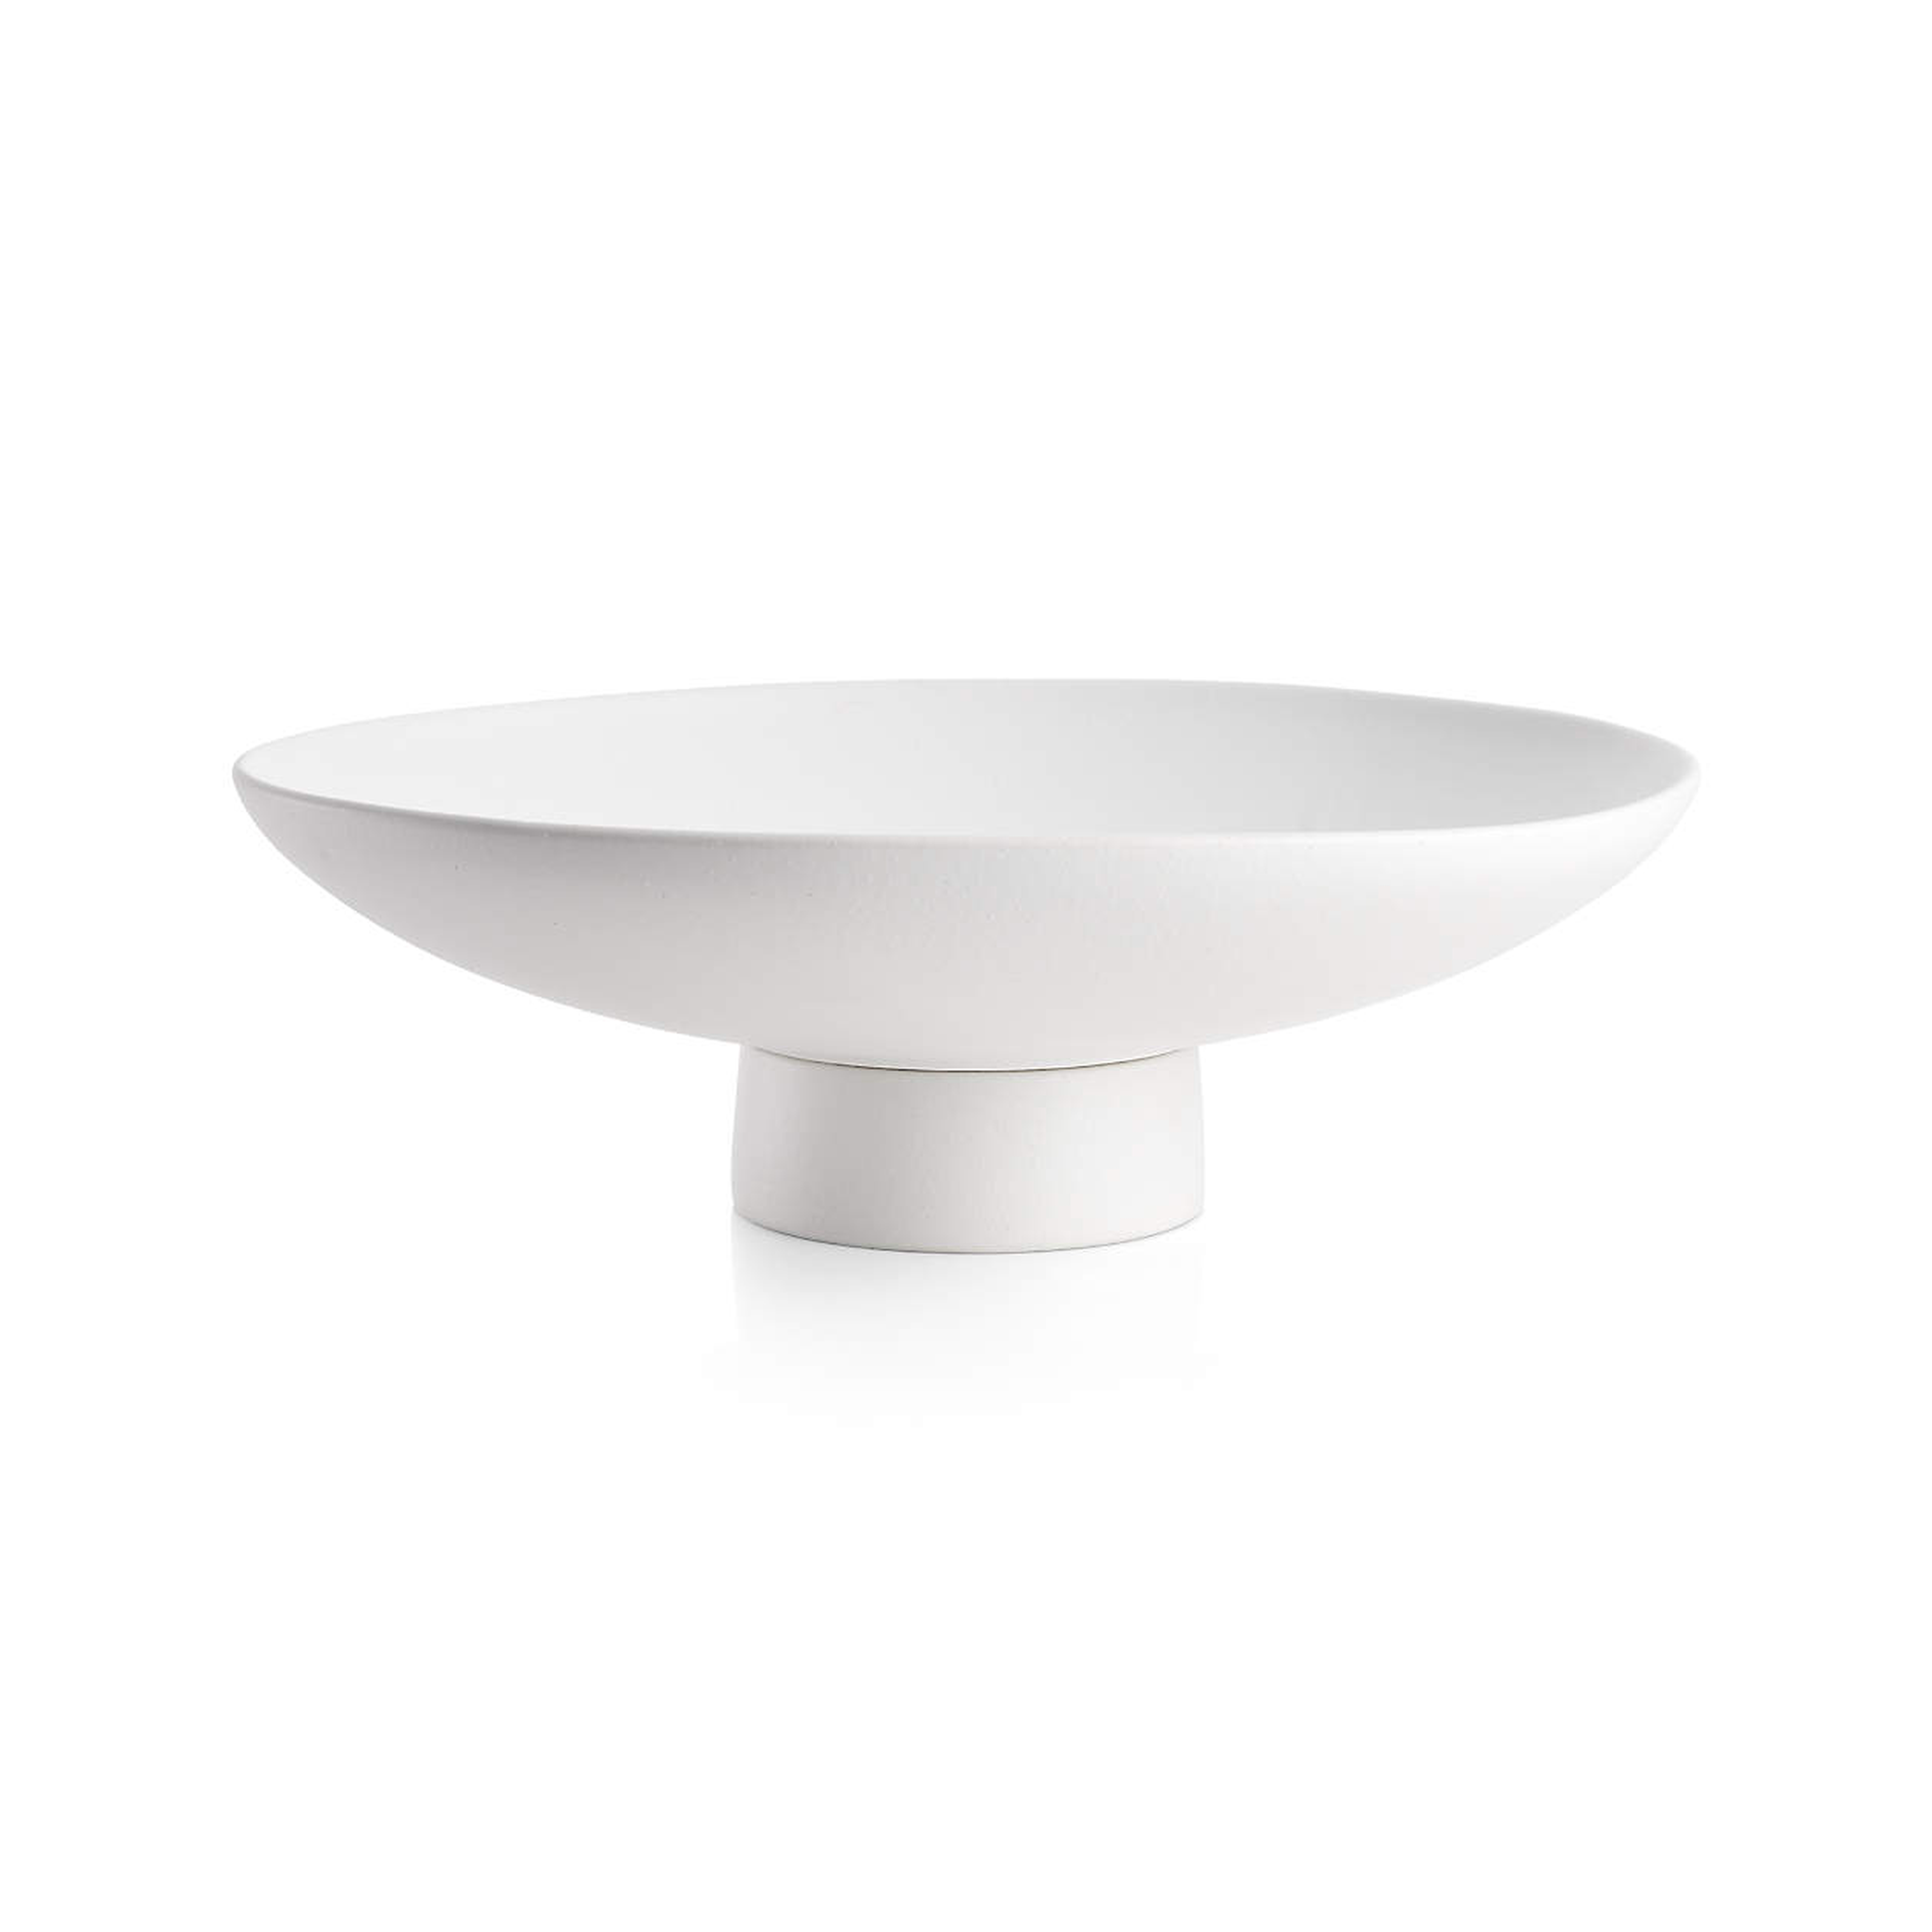 Sailor White Footed Bowl by Leanne Ford - Crate and Barrel